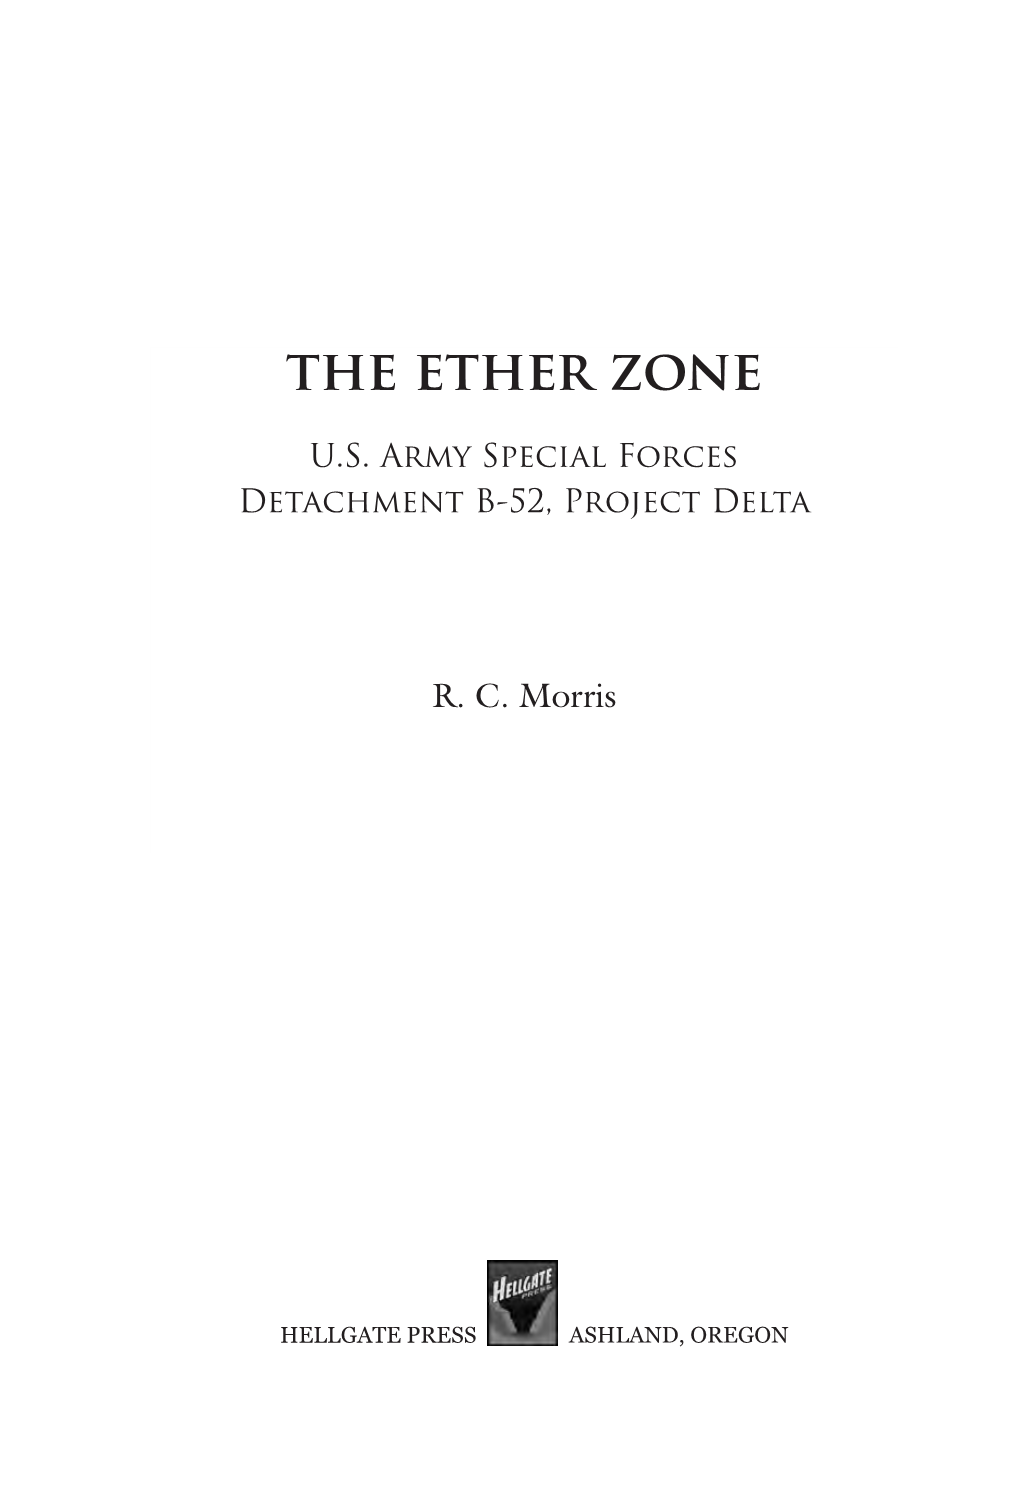 The Ether Zone